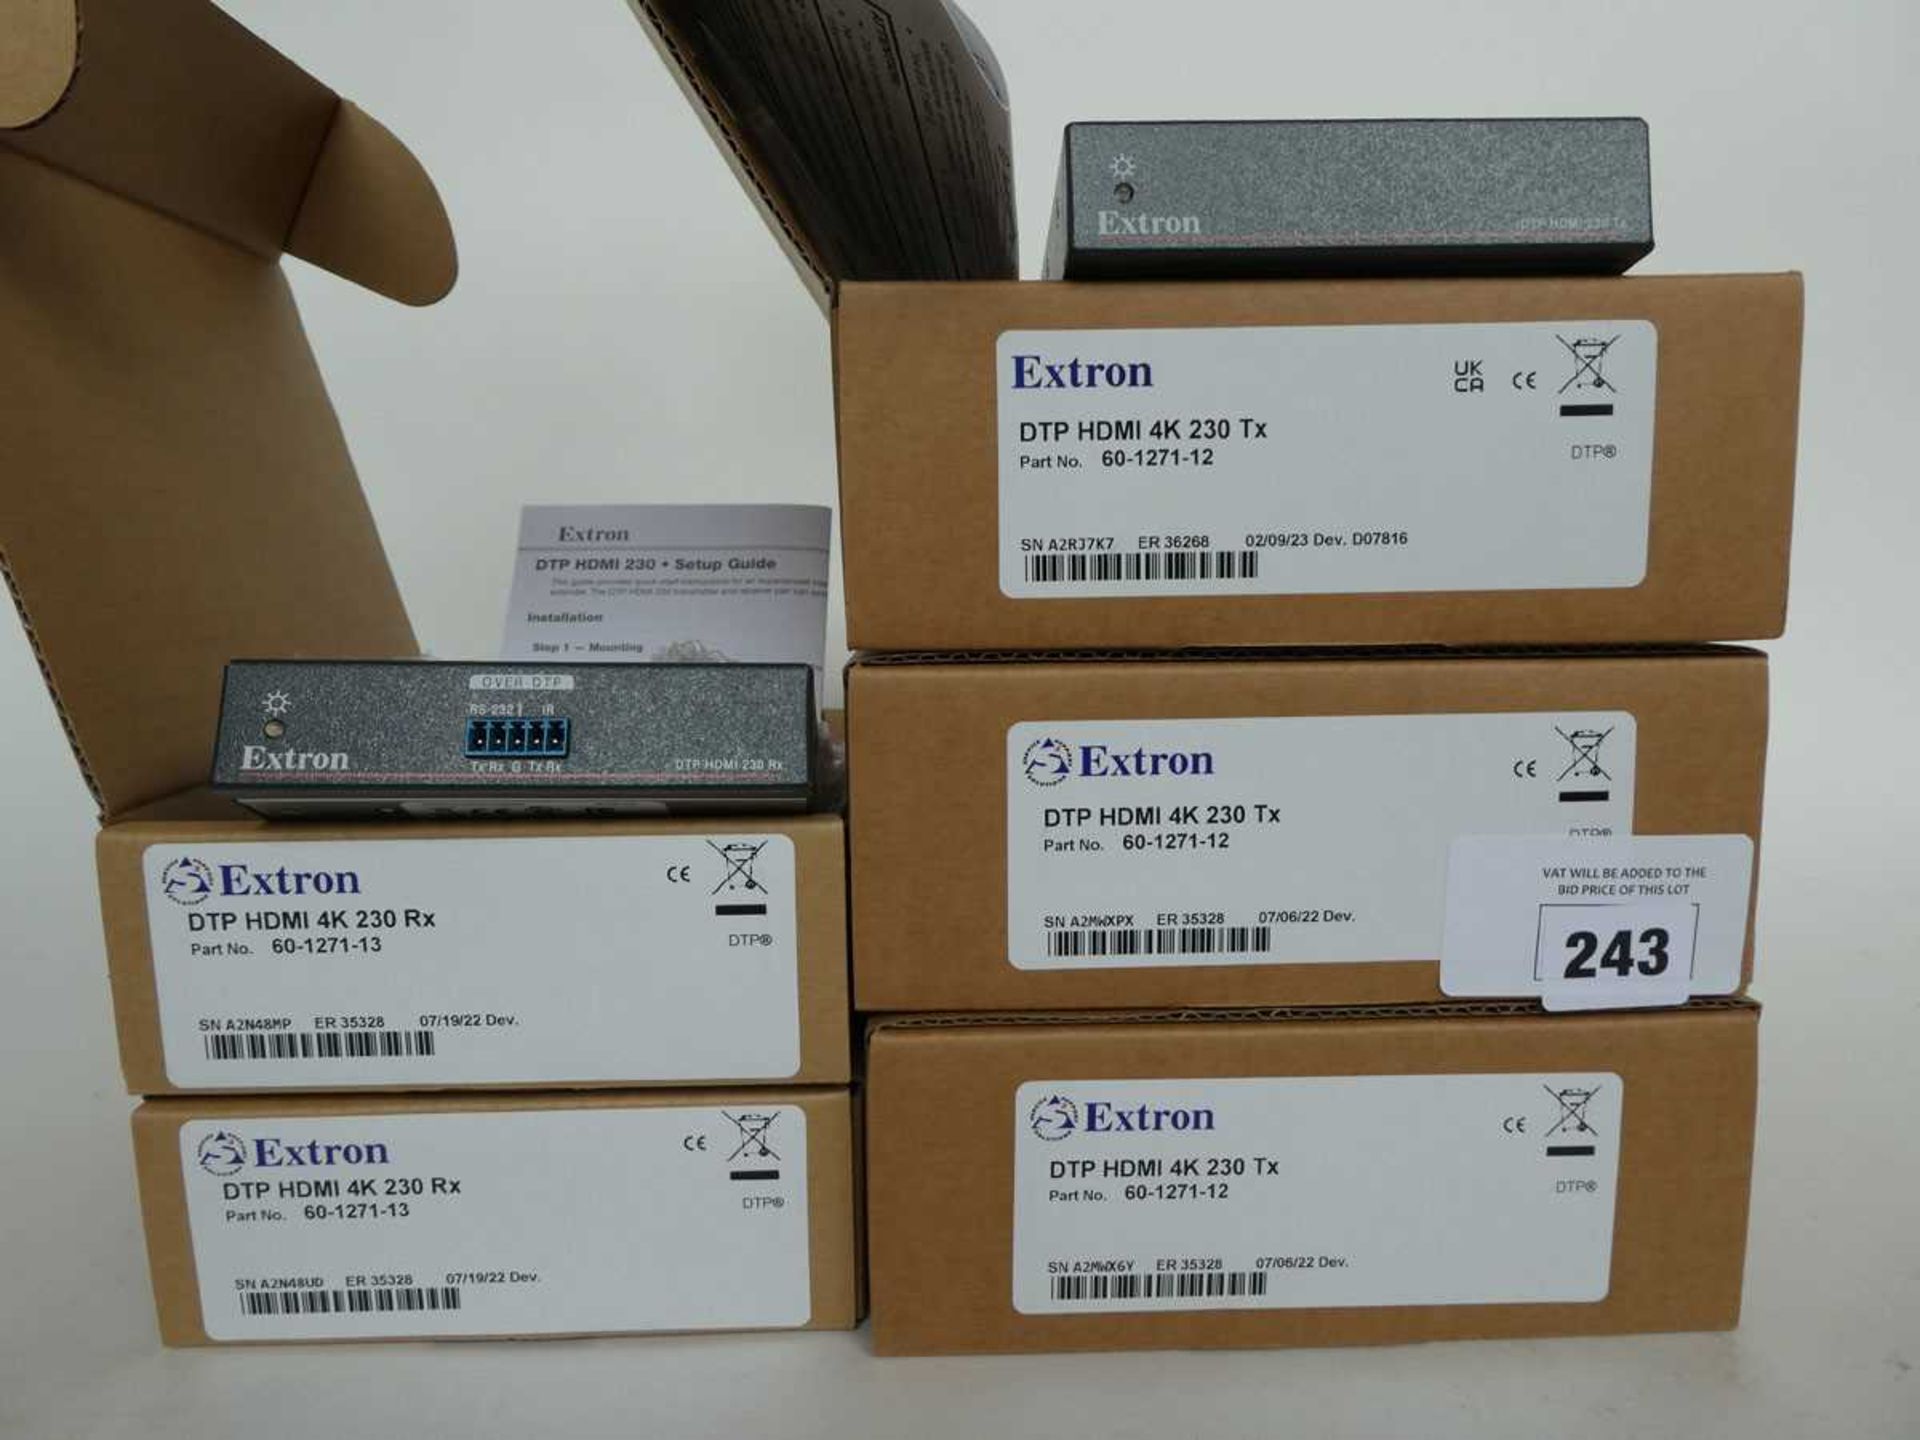 +VAT 5x boxes including 3 Extron DTP HDMI 4K 230 TX transmitters with power supply and boxes, and